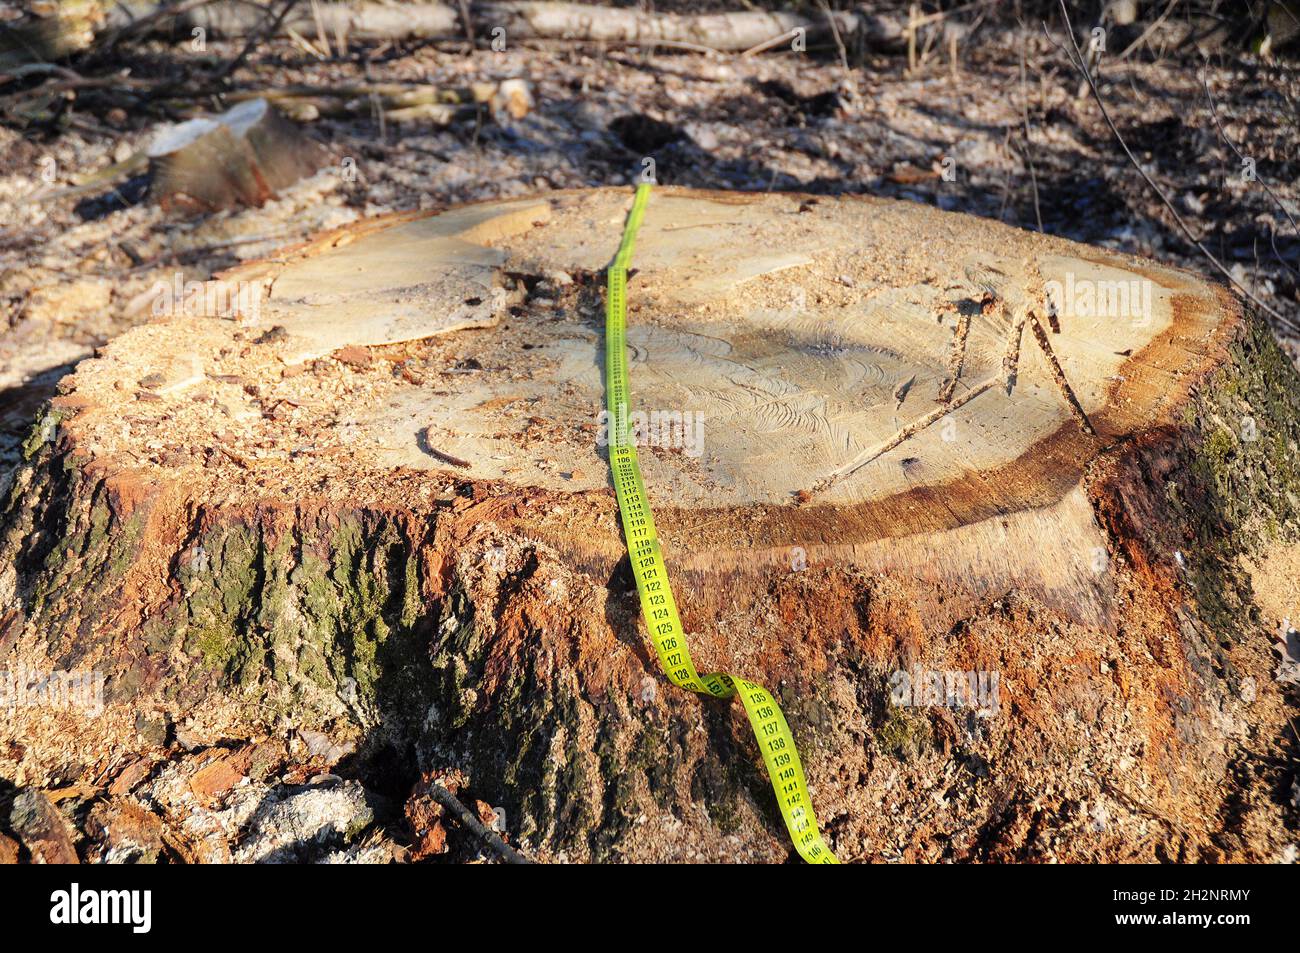 Oak Tree stump being cut down. Deforestation concept and when a tree falls in a forest that is being cut down for development as an icon for environme Stock Photo